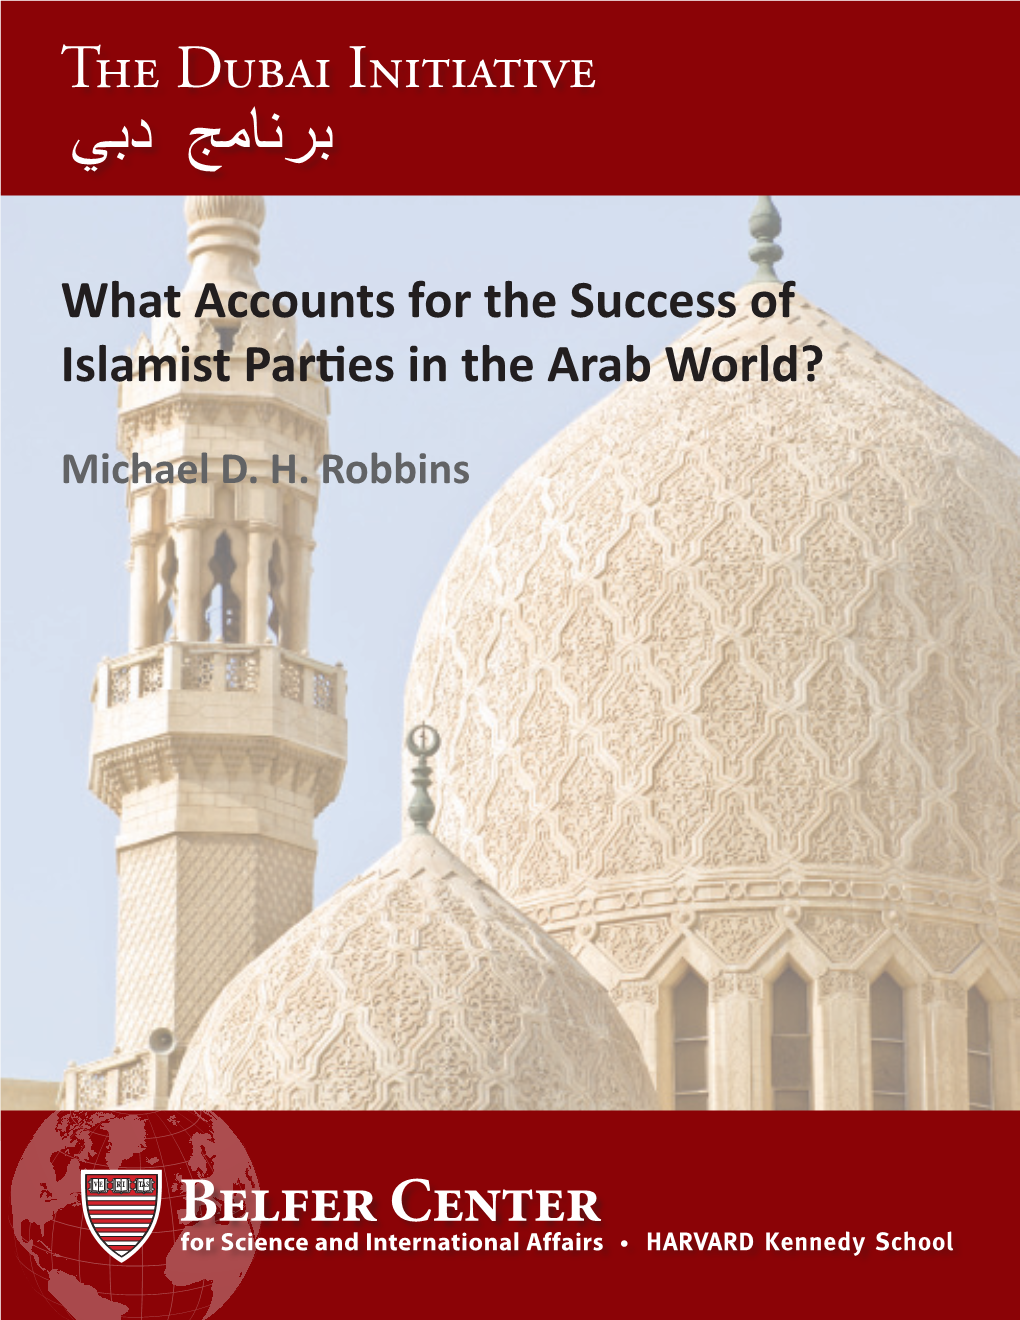 What Accounts for the Success of Islamist Parties in the Arab World?